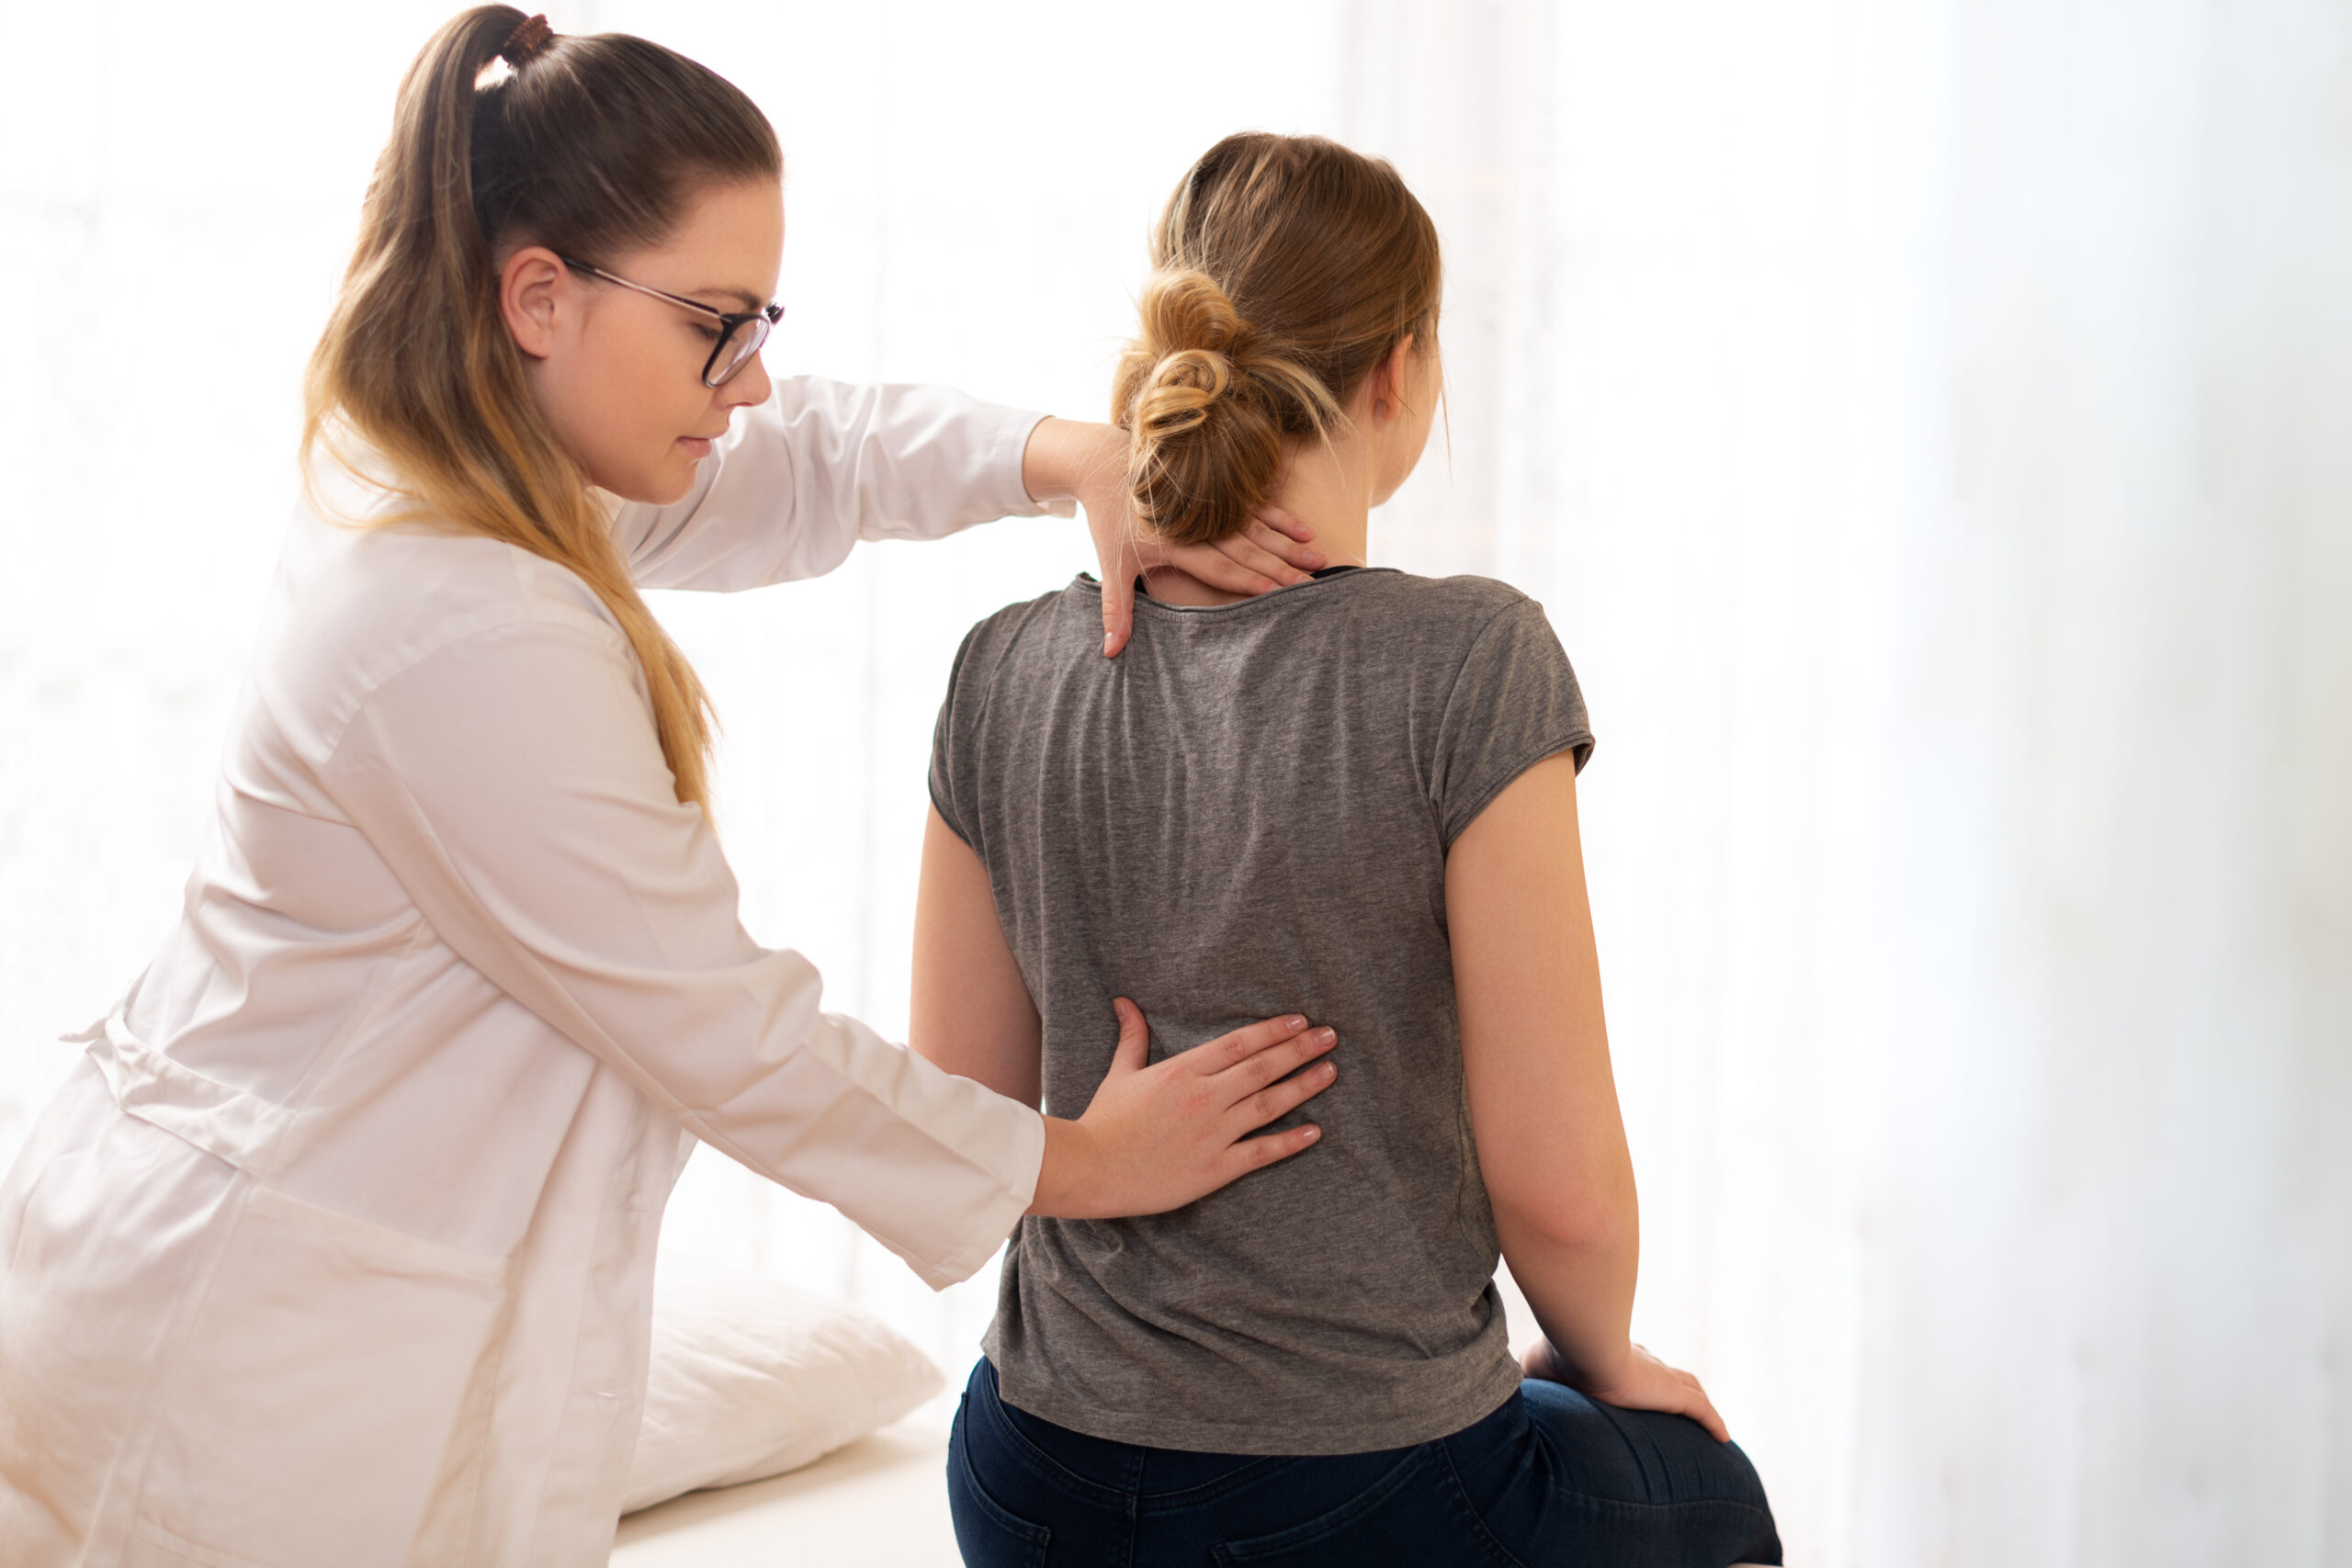 5 Reasons To Undergo Physical Therapy After a Car Accident